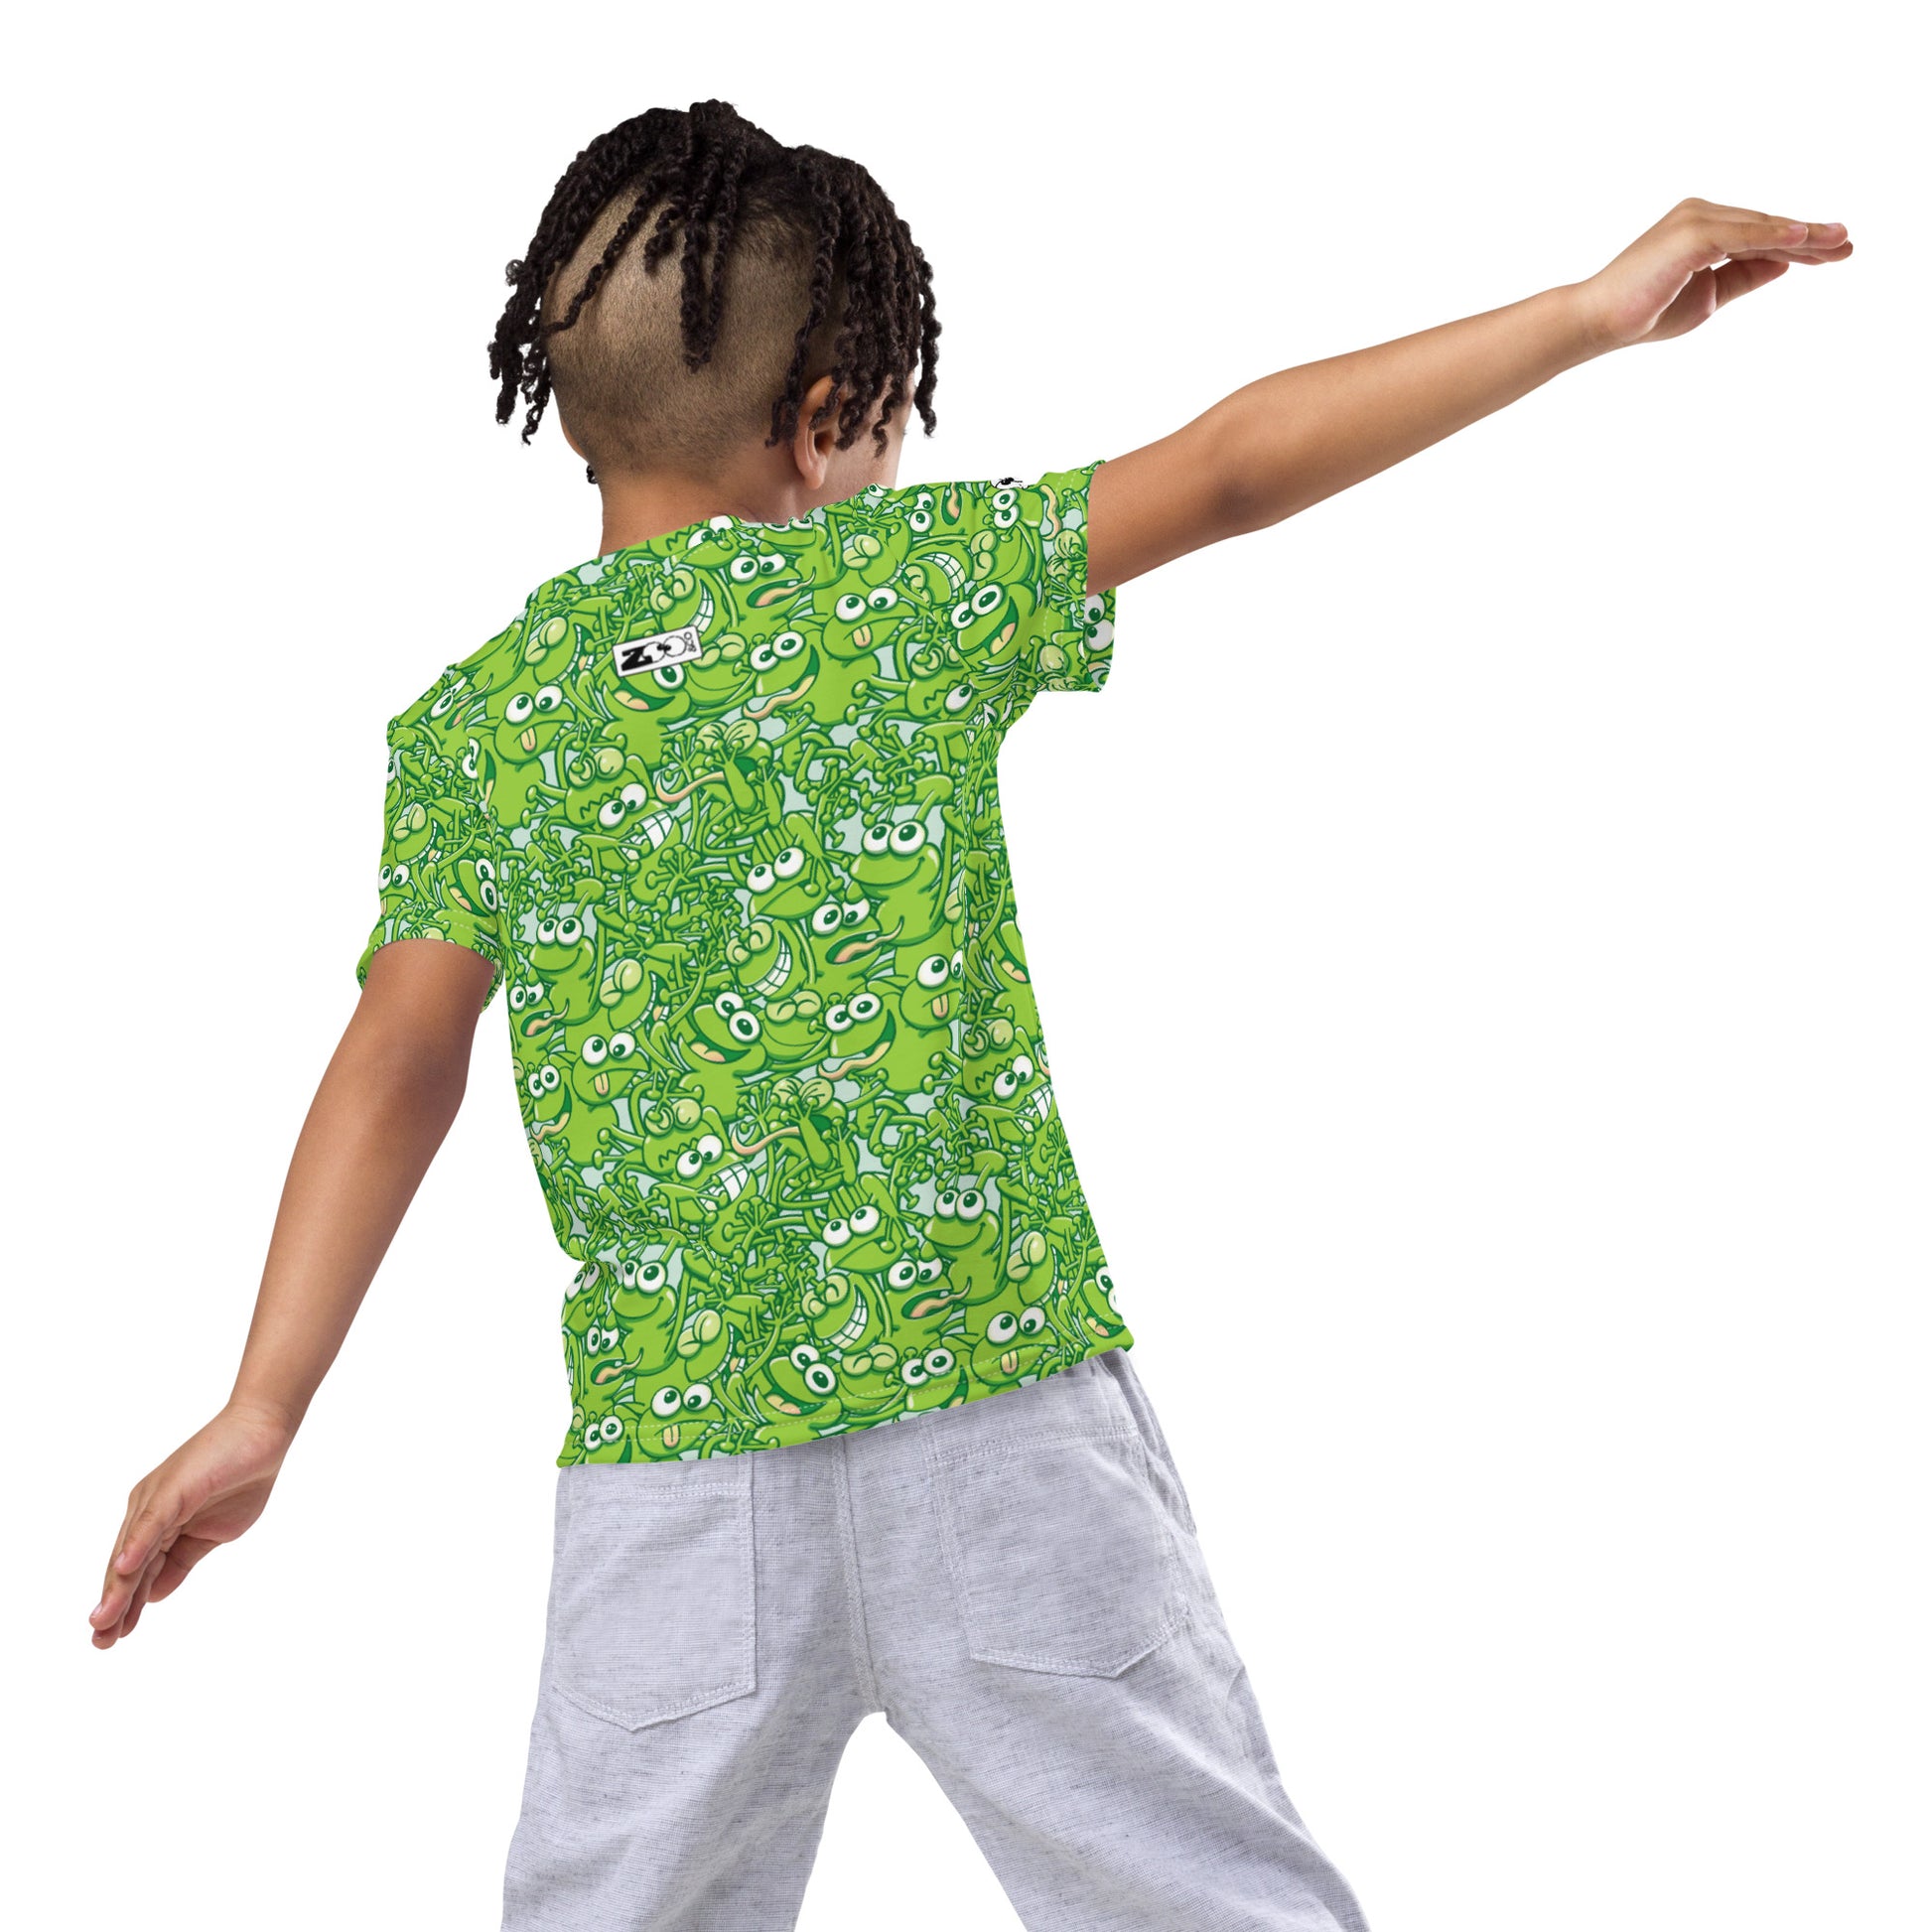 A tangled army of happy green frogs appears when the rain stops Kids crew neck t-shirt. Back view